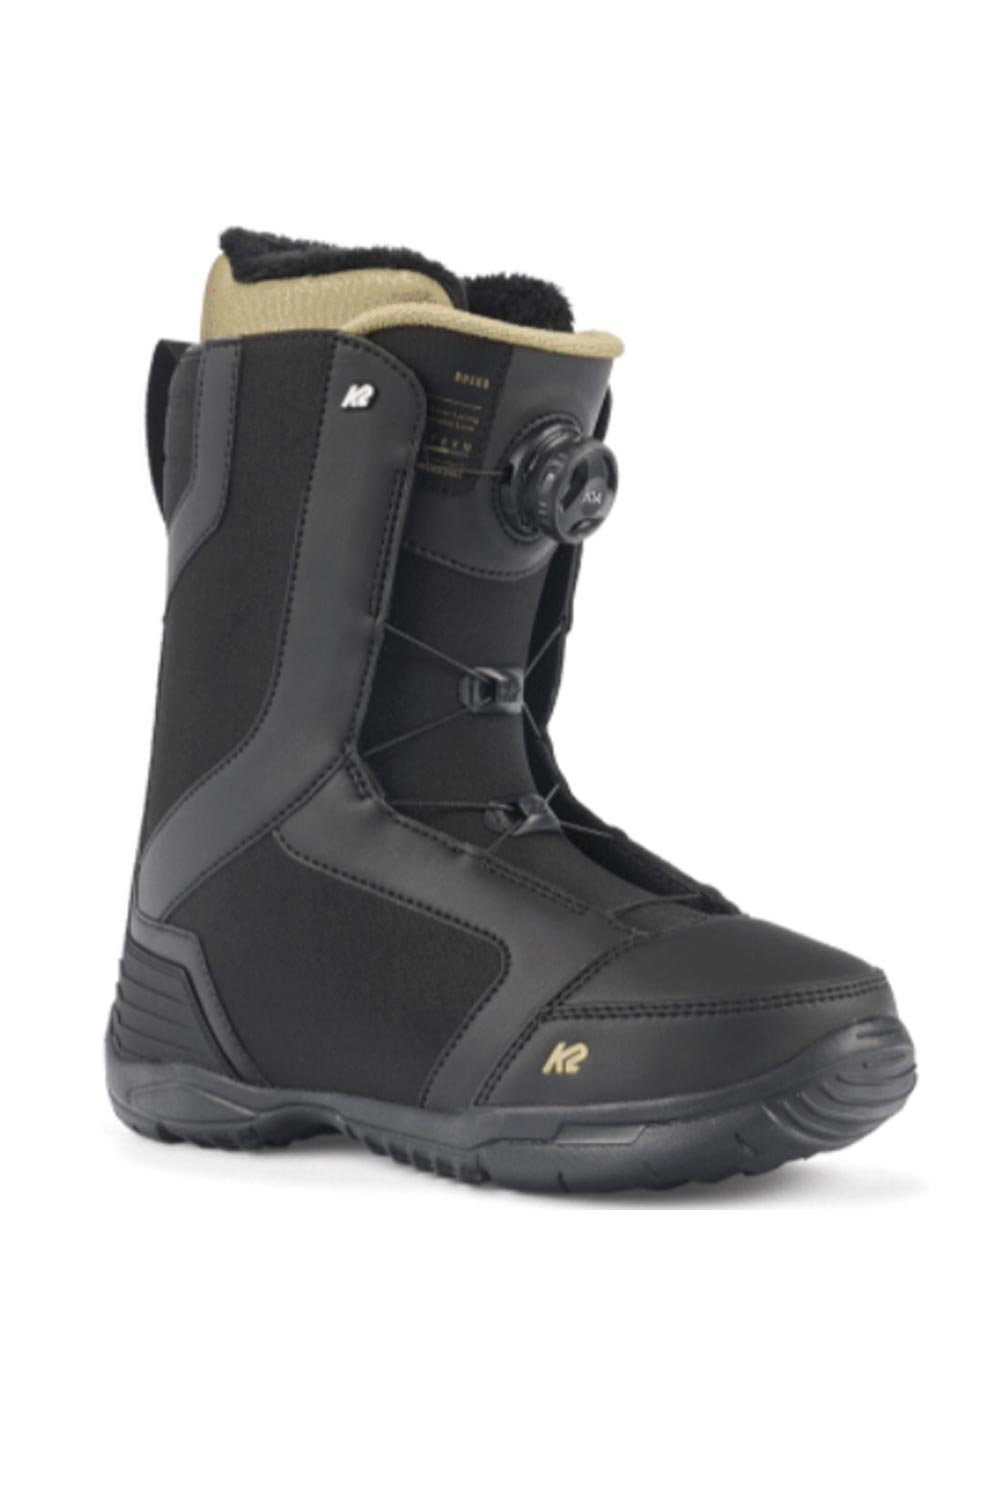 Men's K2 Rosko snowboard boots with BOA - black with khaki accents